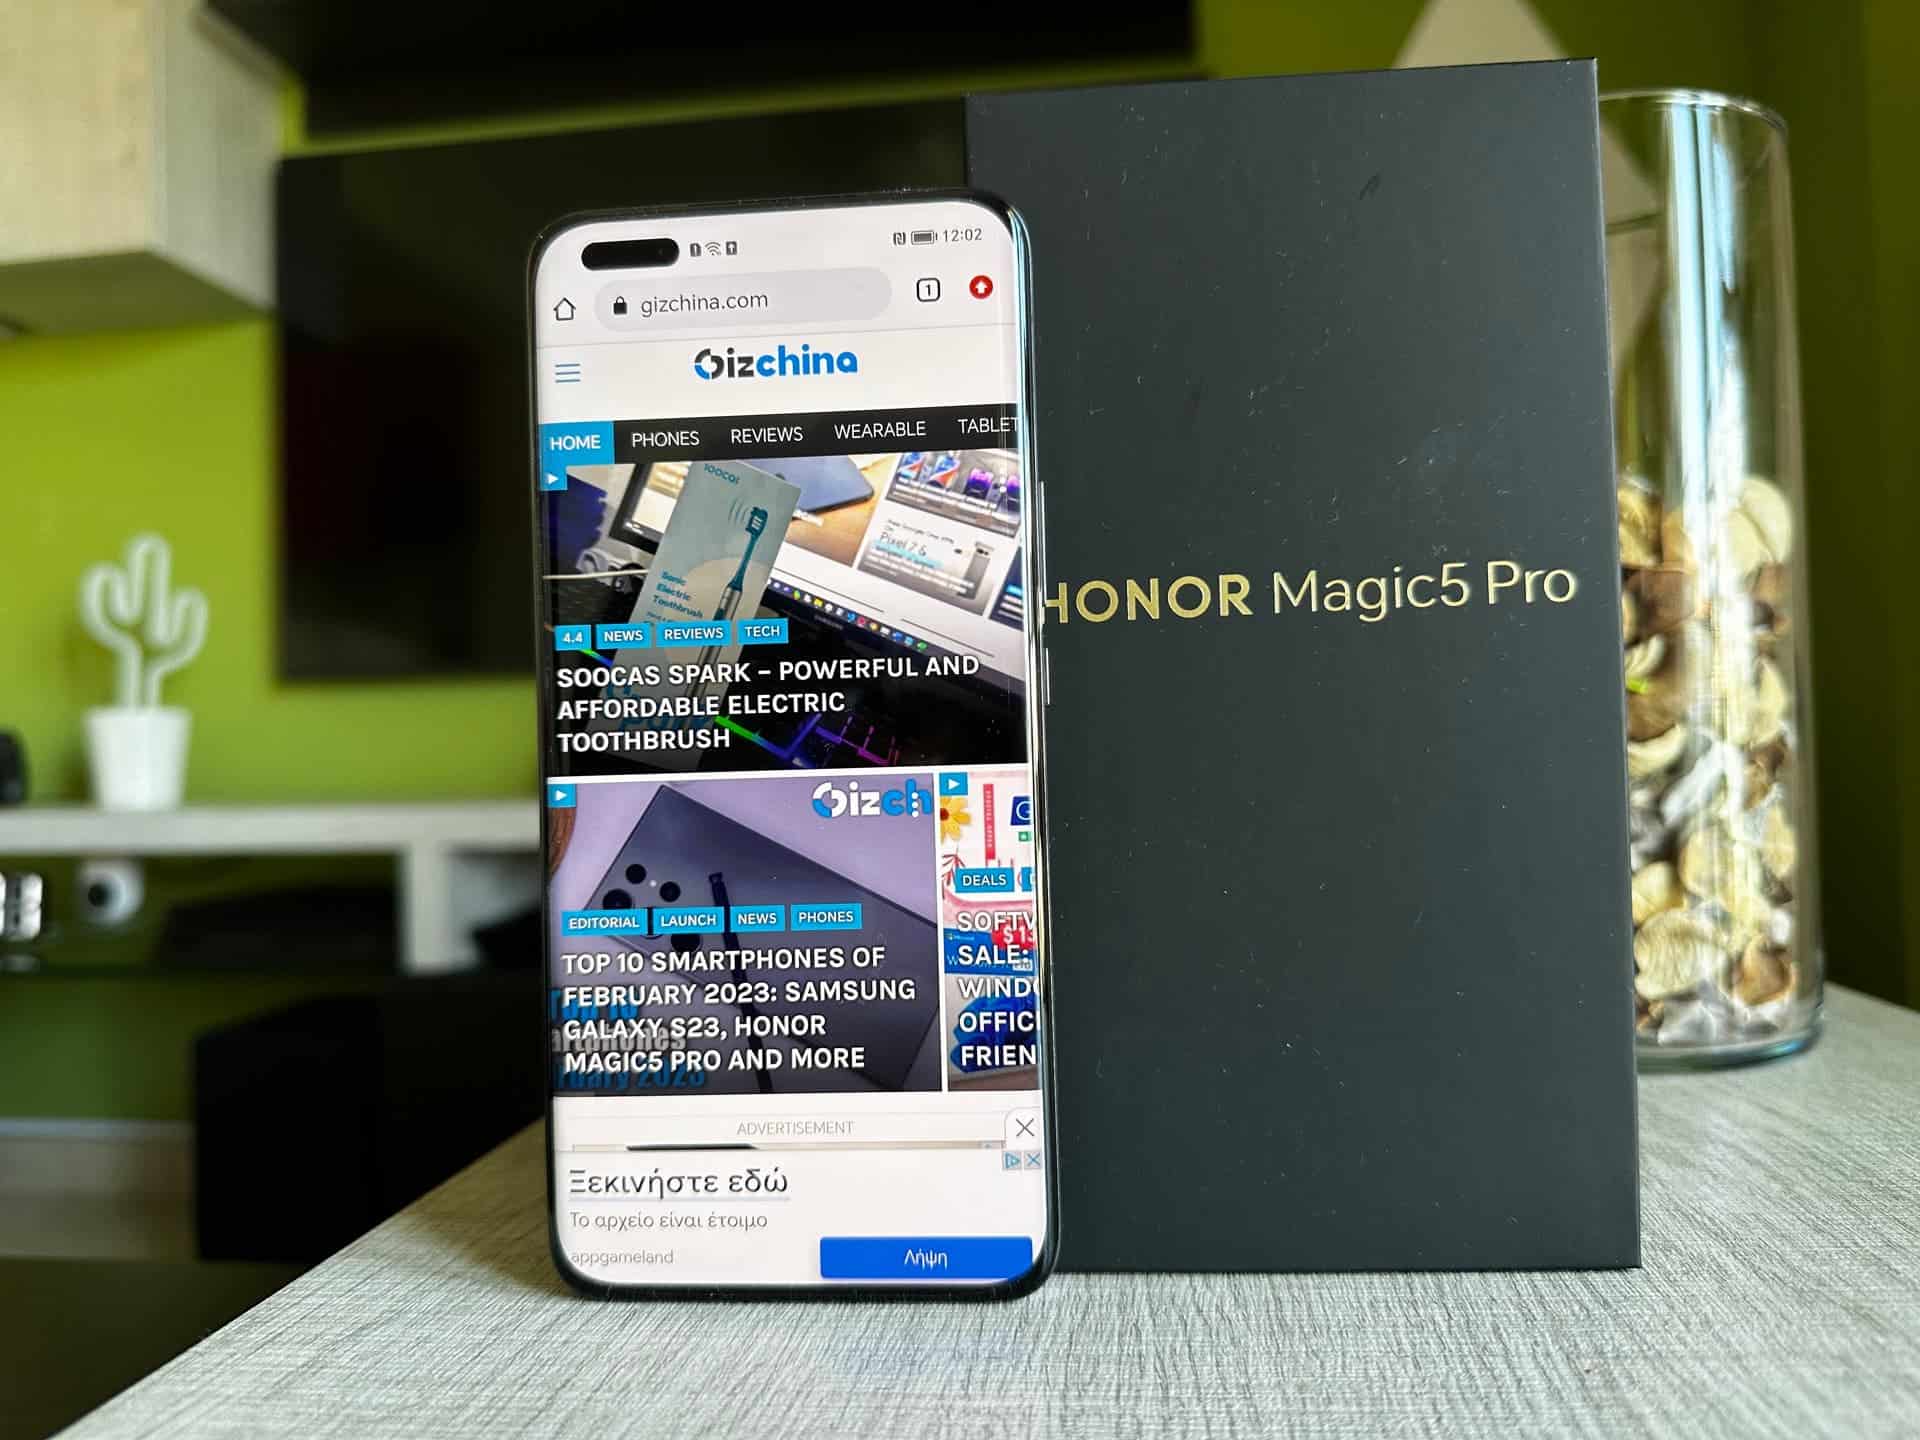 Honor Magic5 Pro review - The smartphone with the full high-end